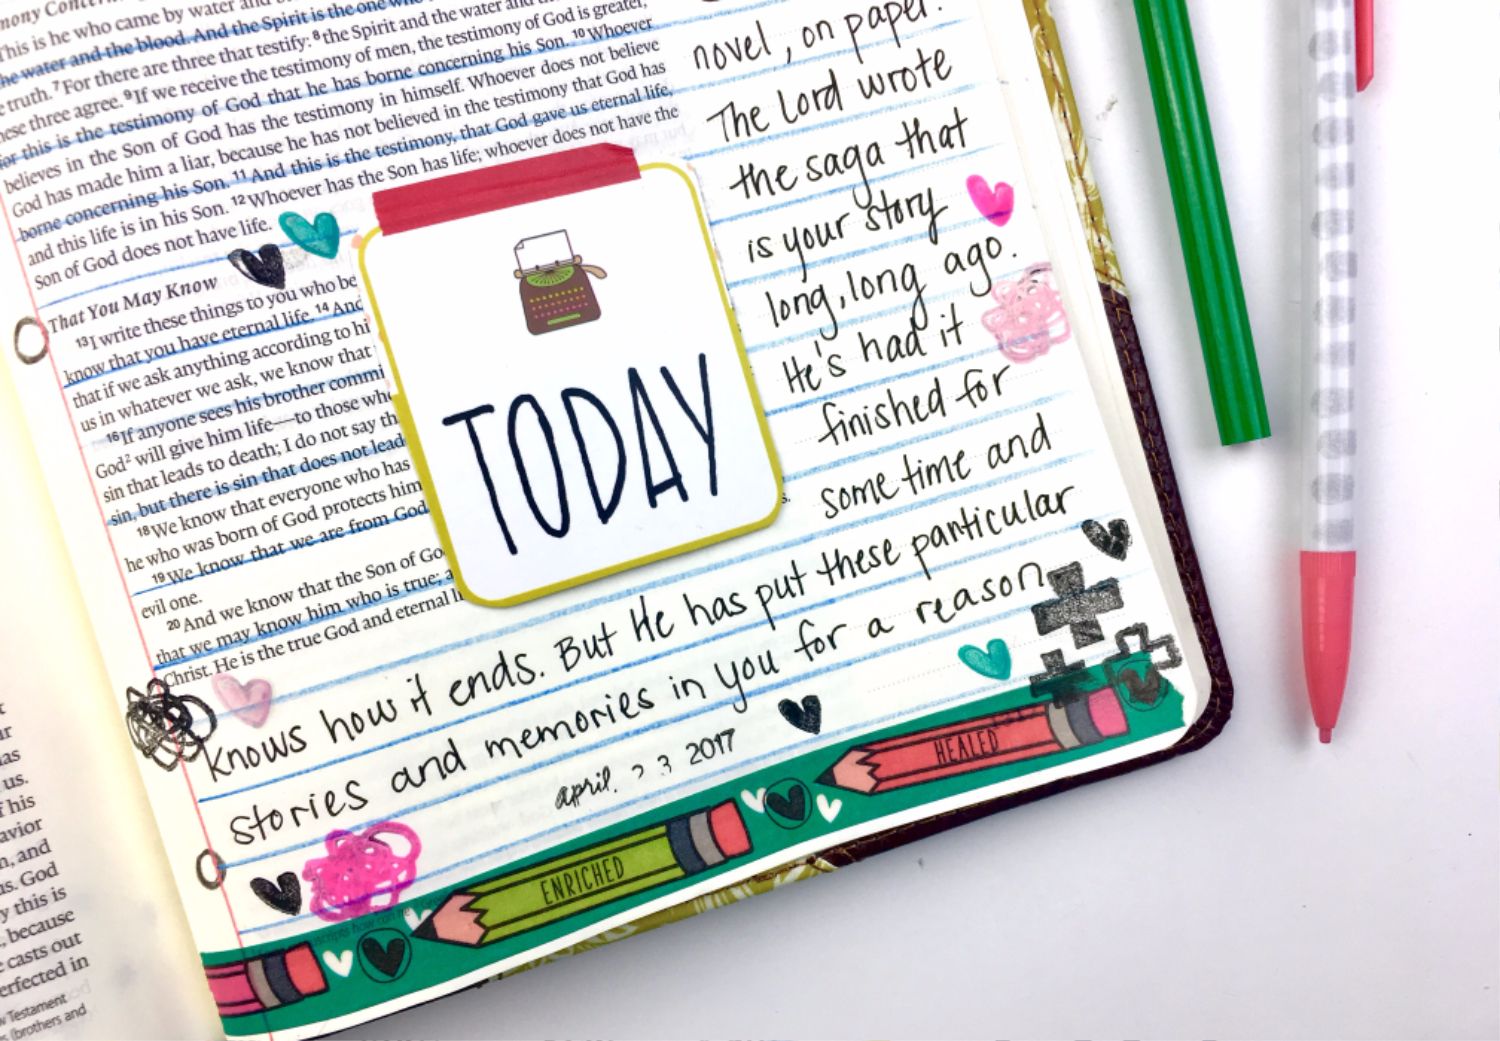 Tips for Bible Journaling No Matter the Artistic Skill Level